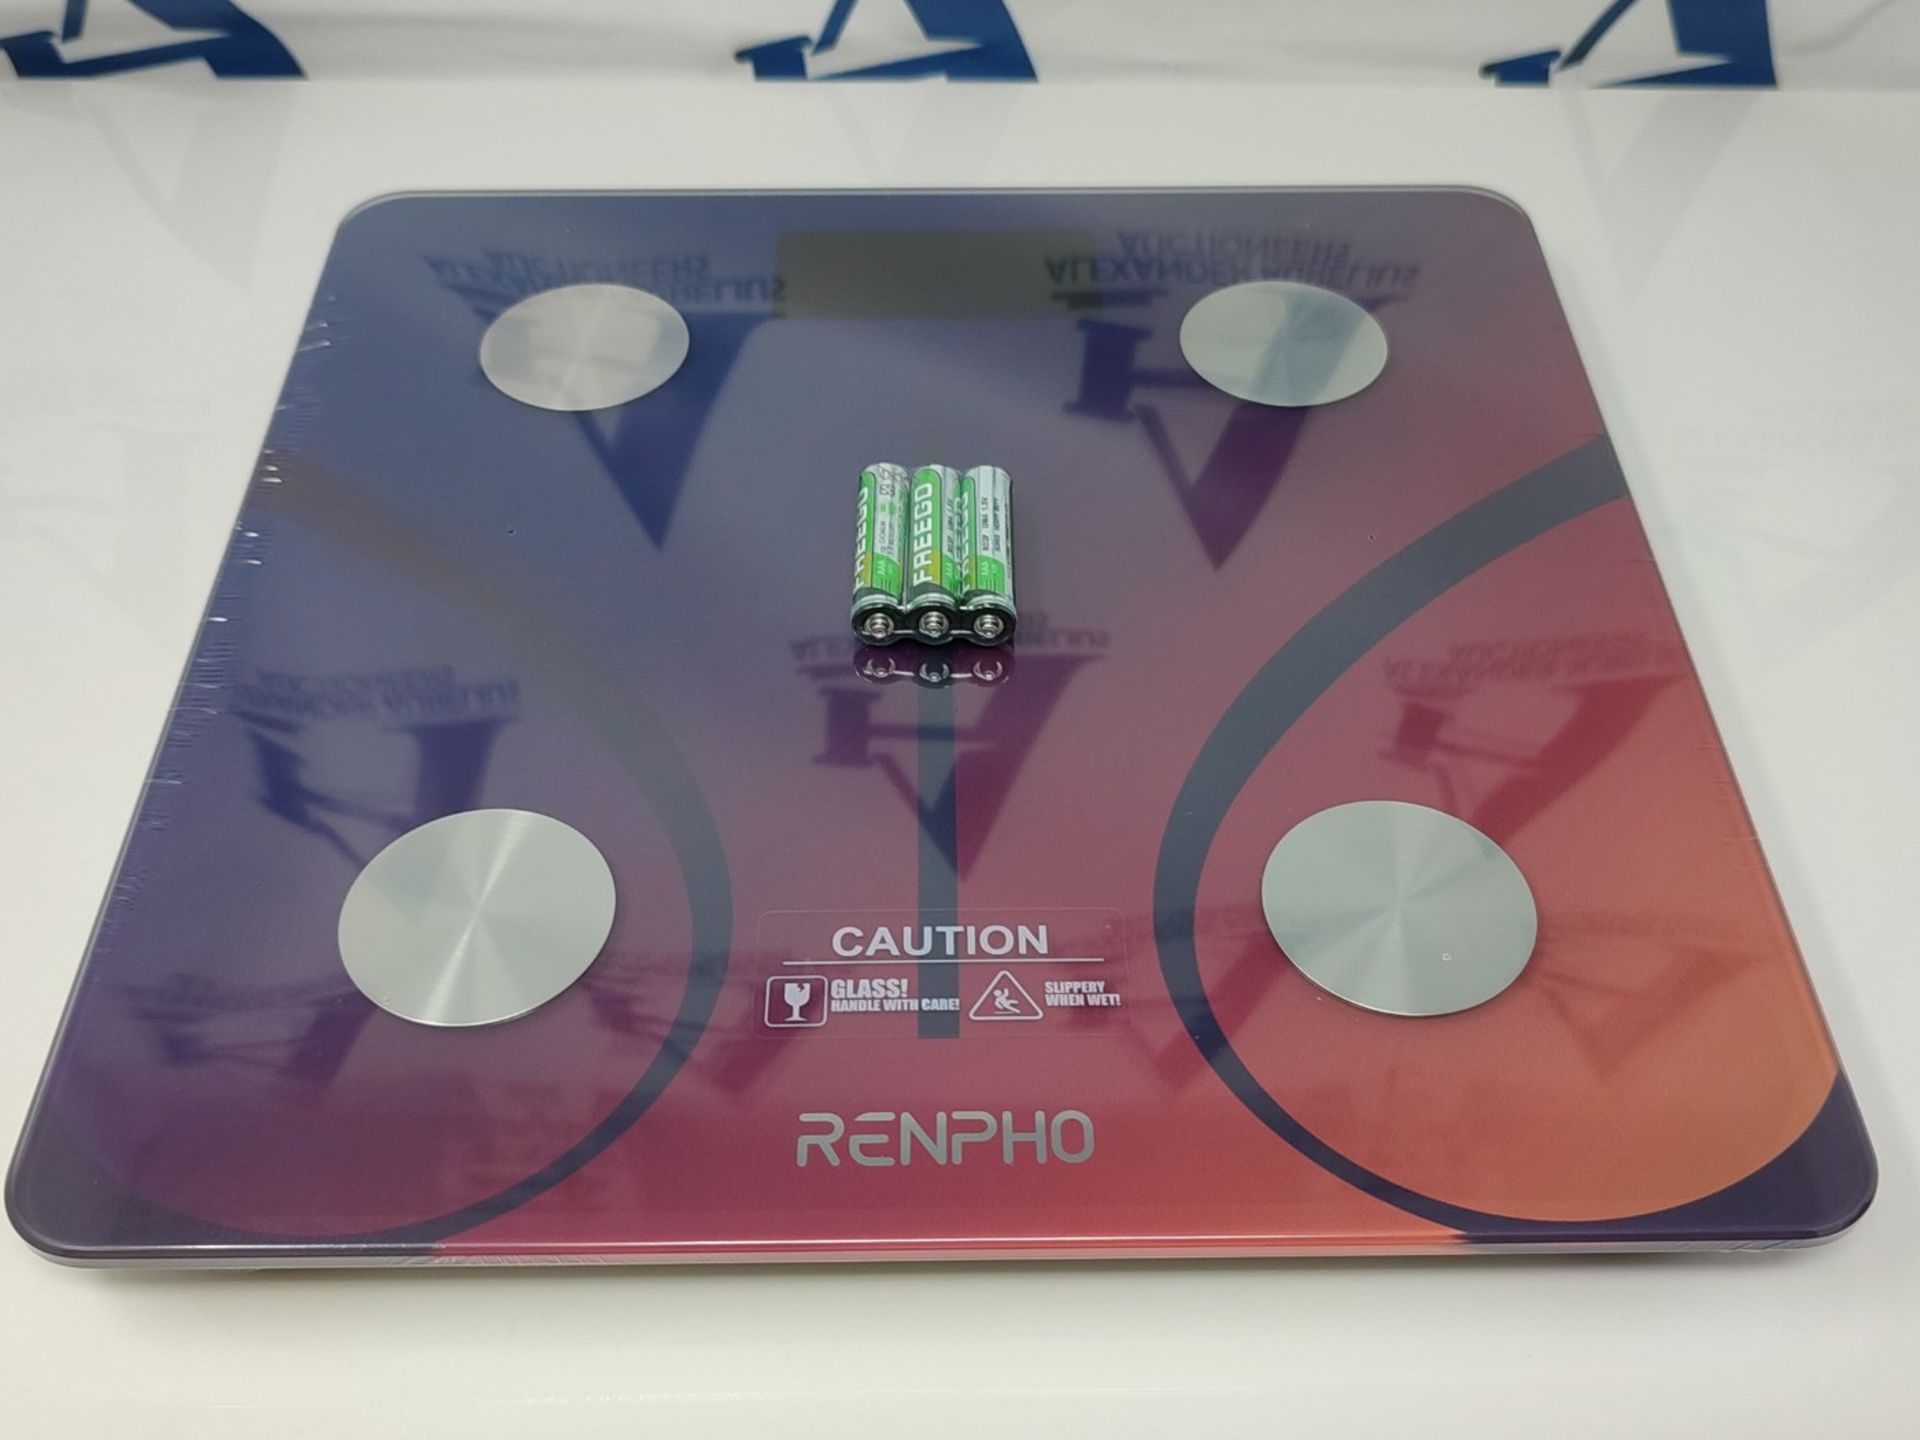 RENPHO Bathroom Scales, Digital Scales for Body Weight with High Precision Sensors, Bl - Image 2 of 2